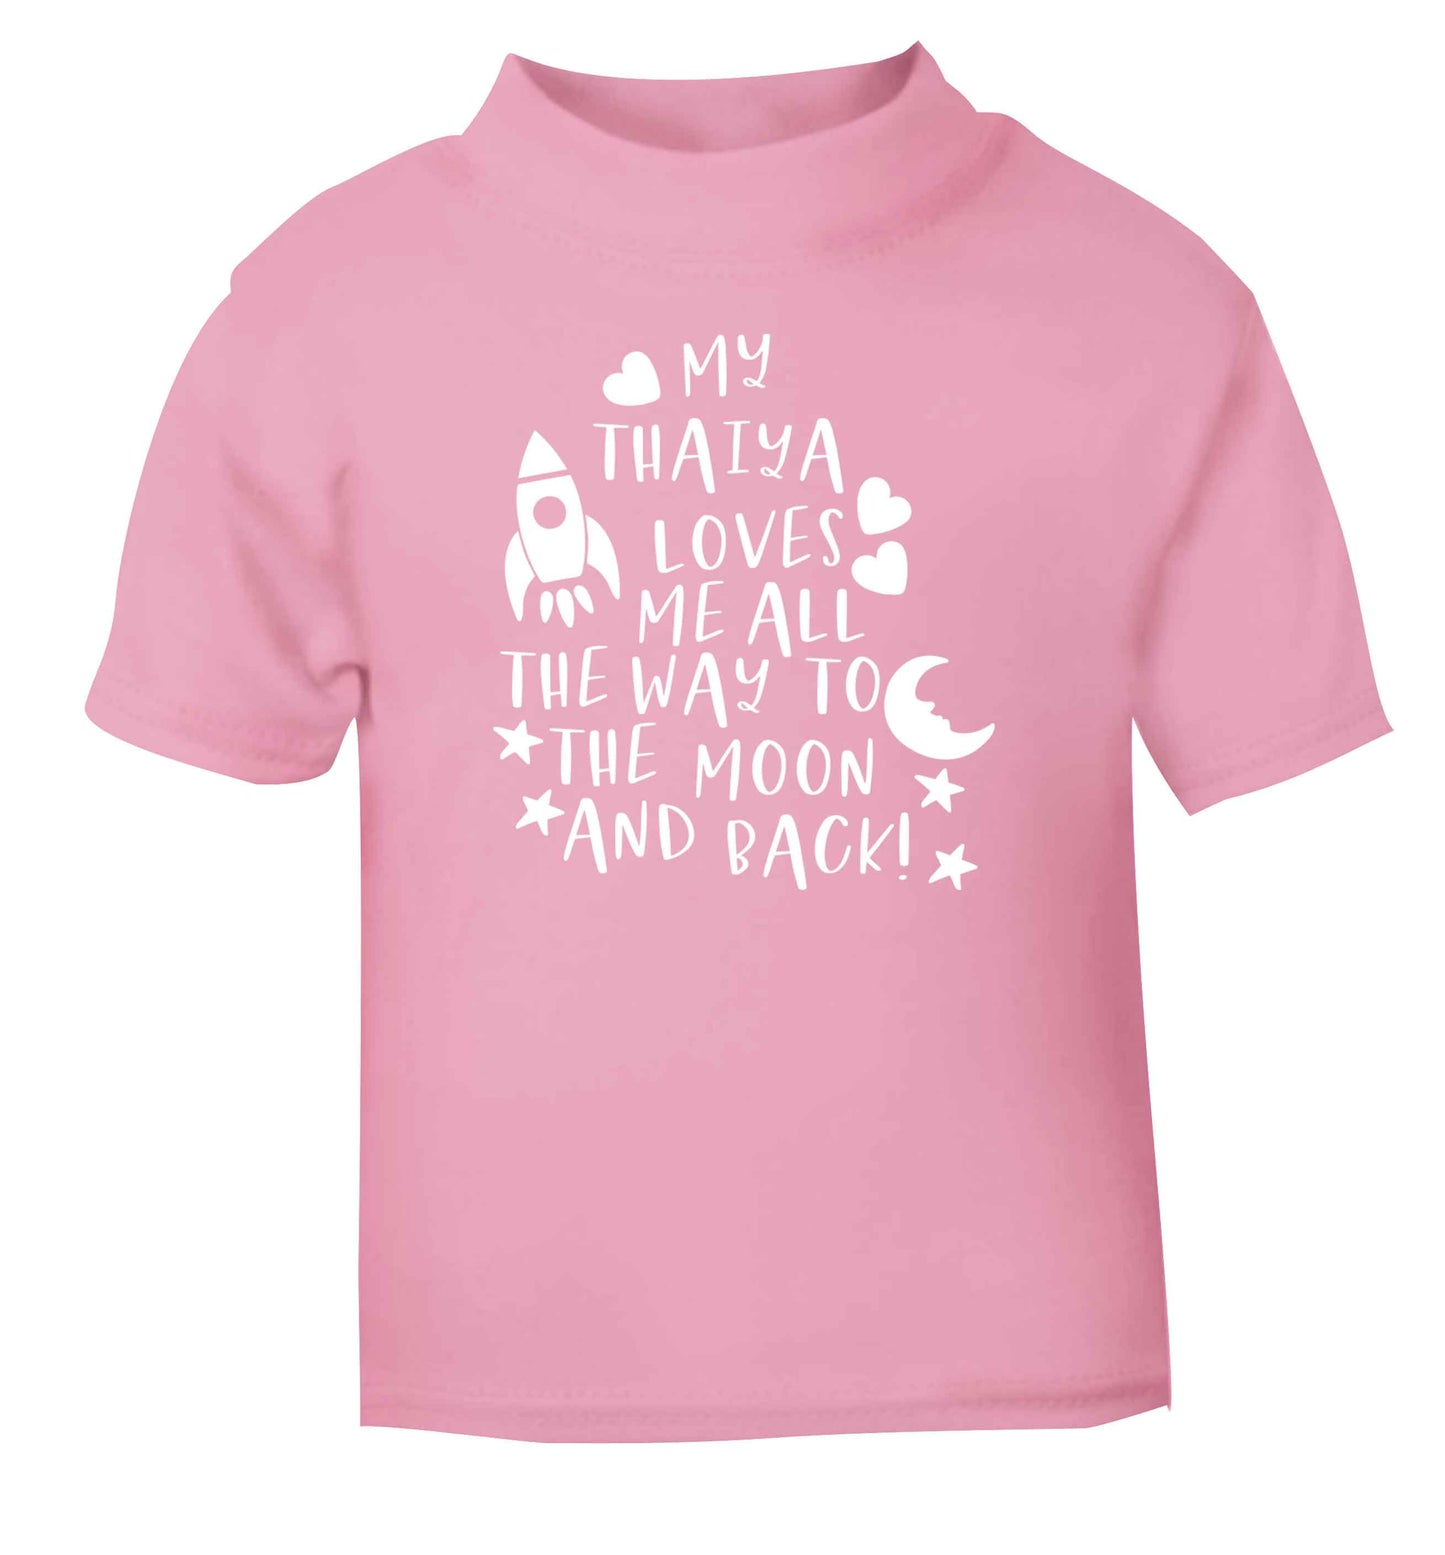 My thaiya loves me all the way to the moon and back light pink Baby Toddler Tshirt 2 Years